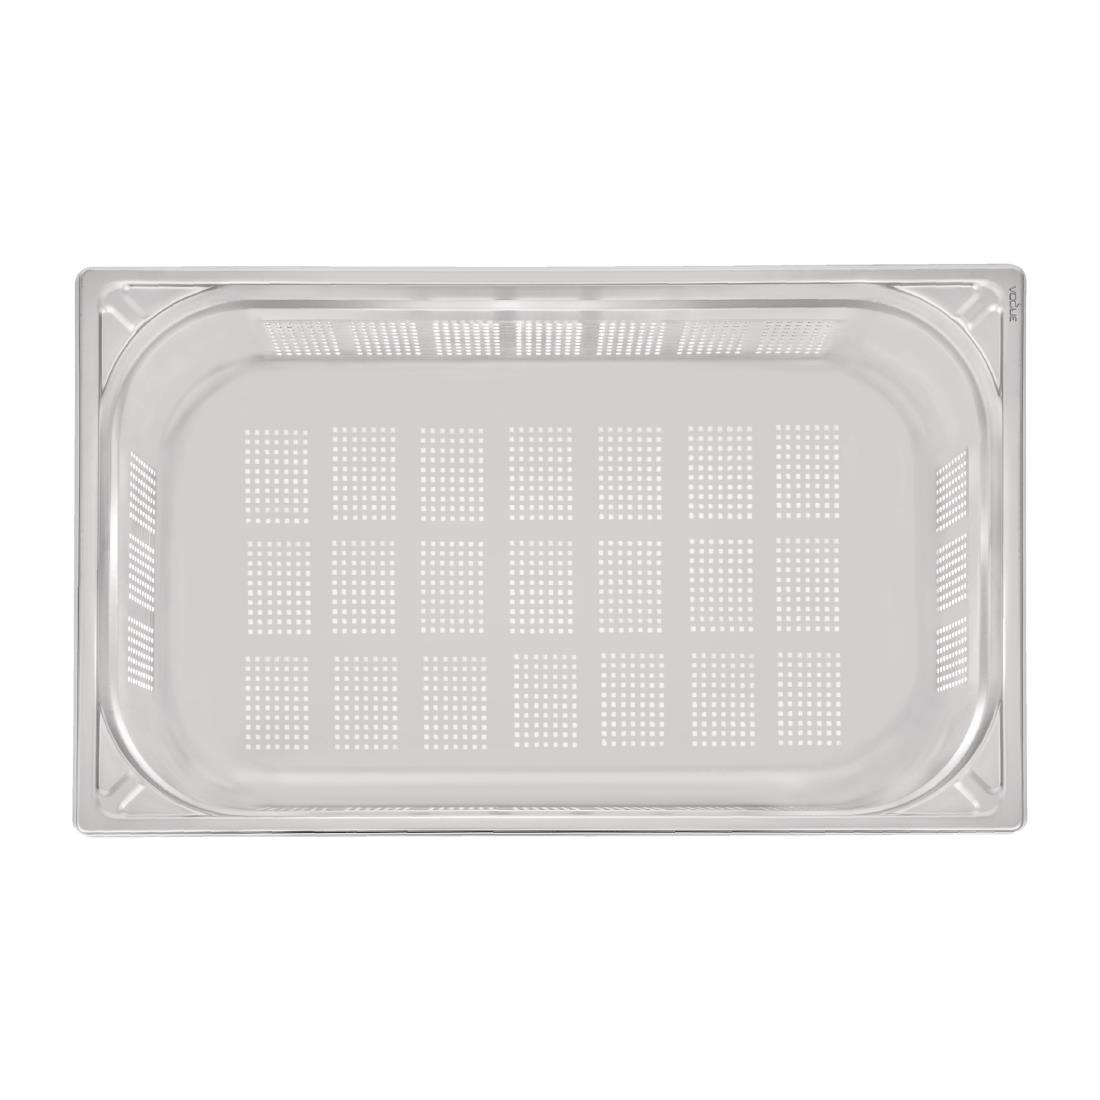 Vogue Heavy Duty Stainless Steel Perforated 1/1 Gastronorm Pan 150mm - DY176  - 4